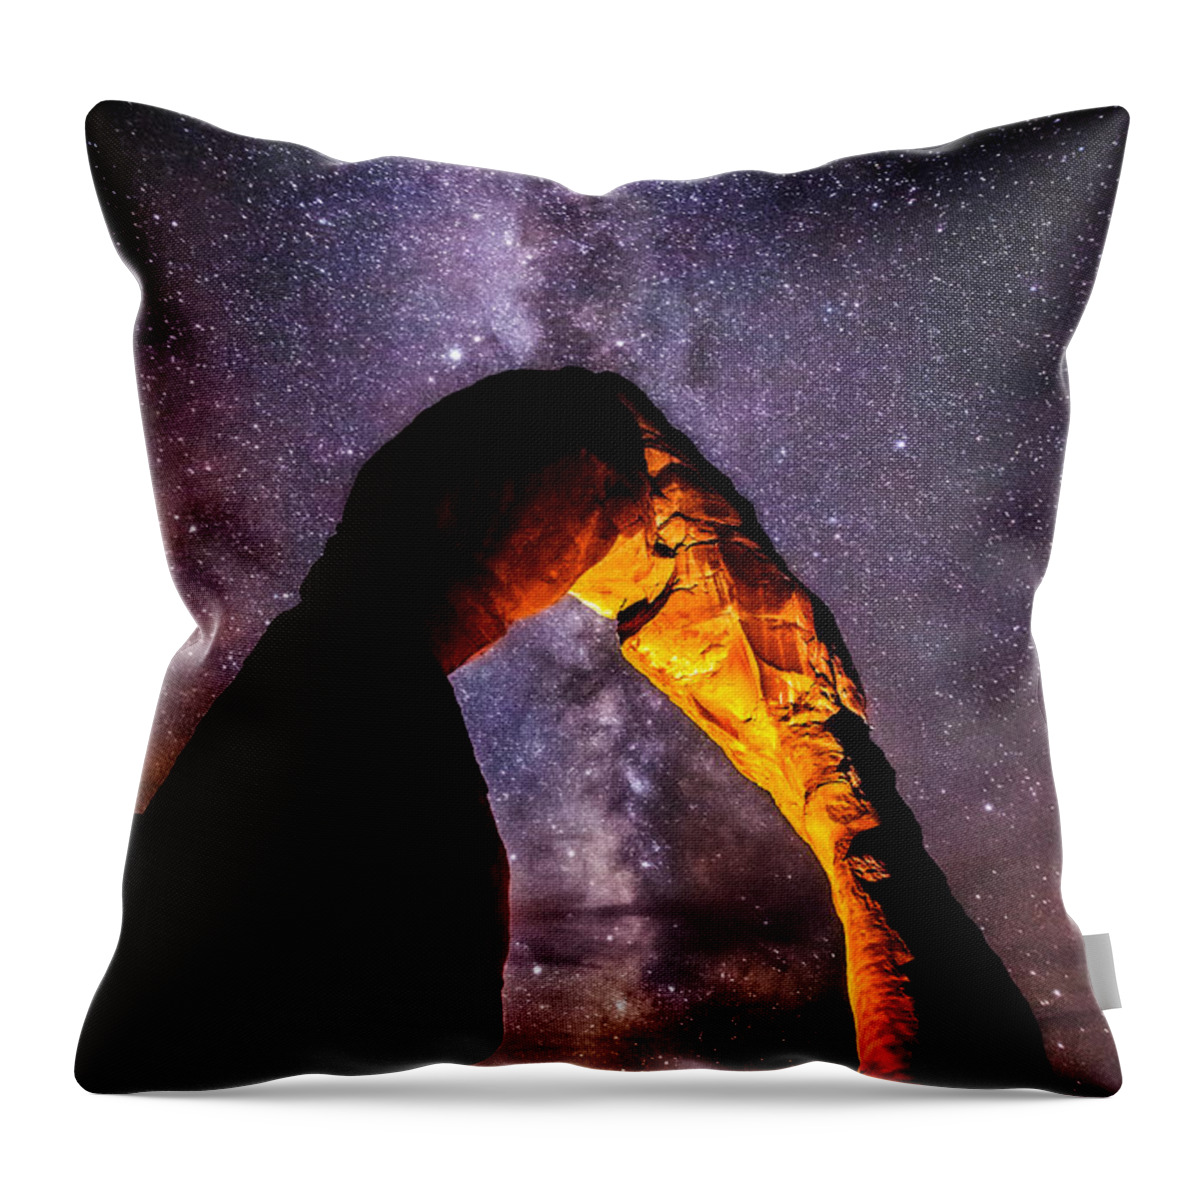 Arches National Park Throw Pillow featuring the photograph Milky Way Explorer by Darren White